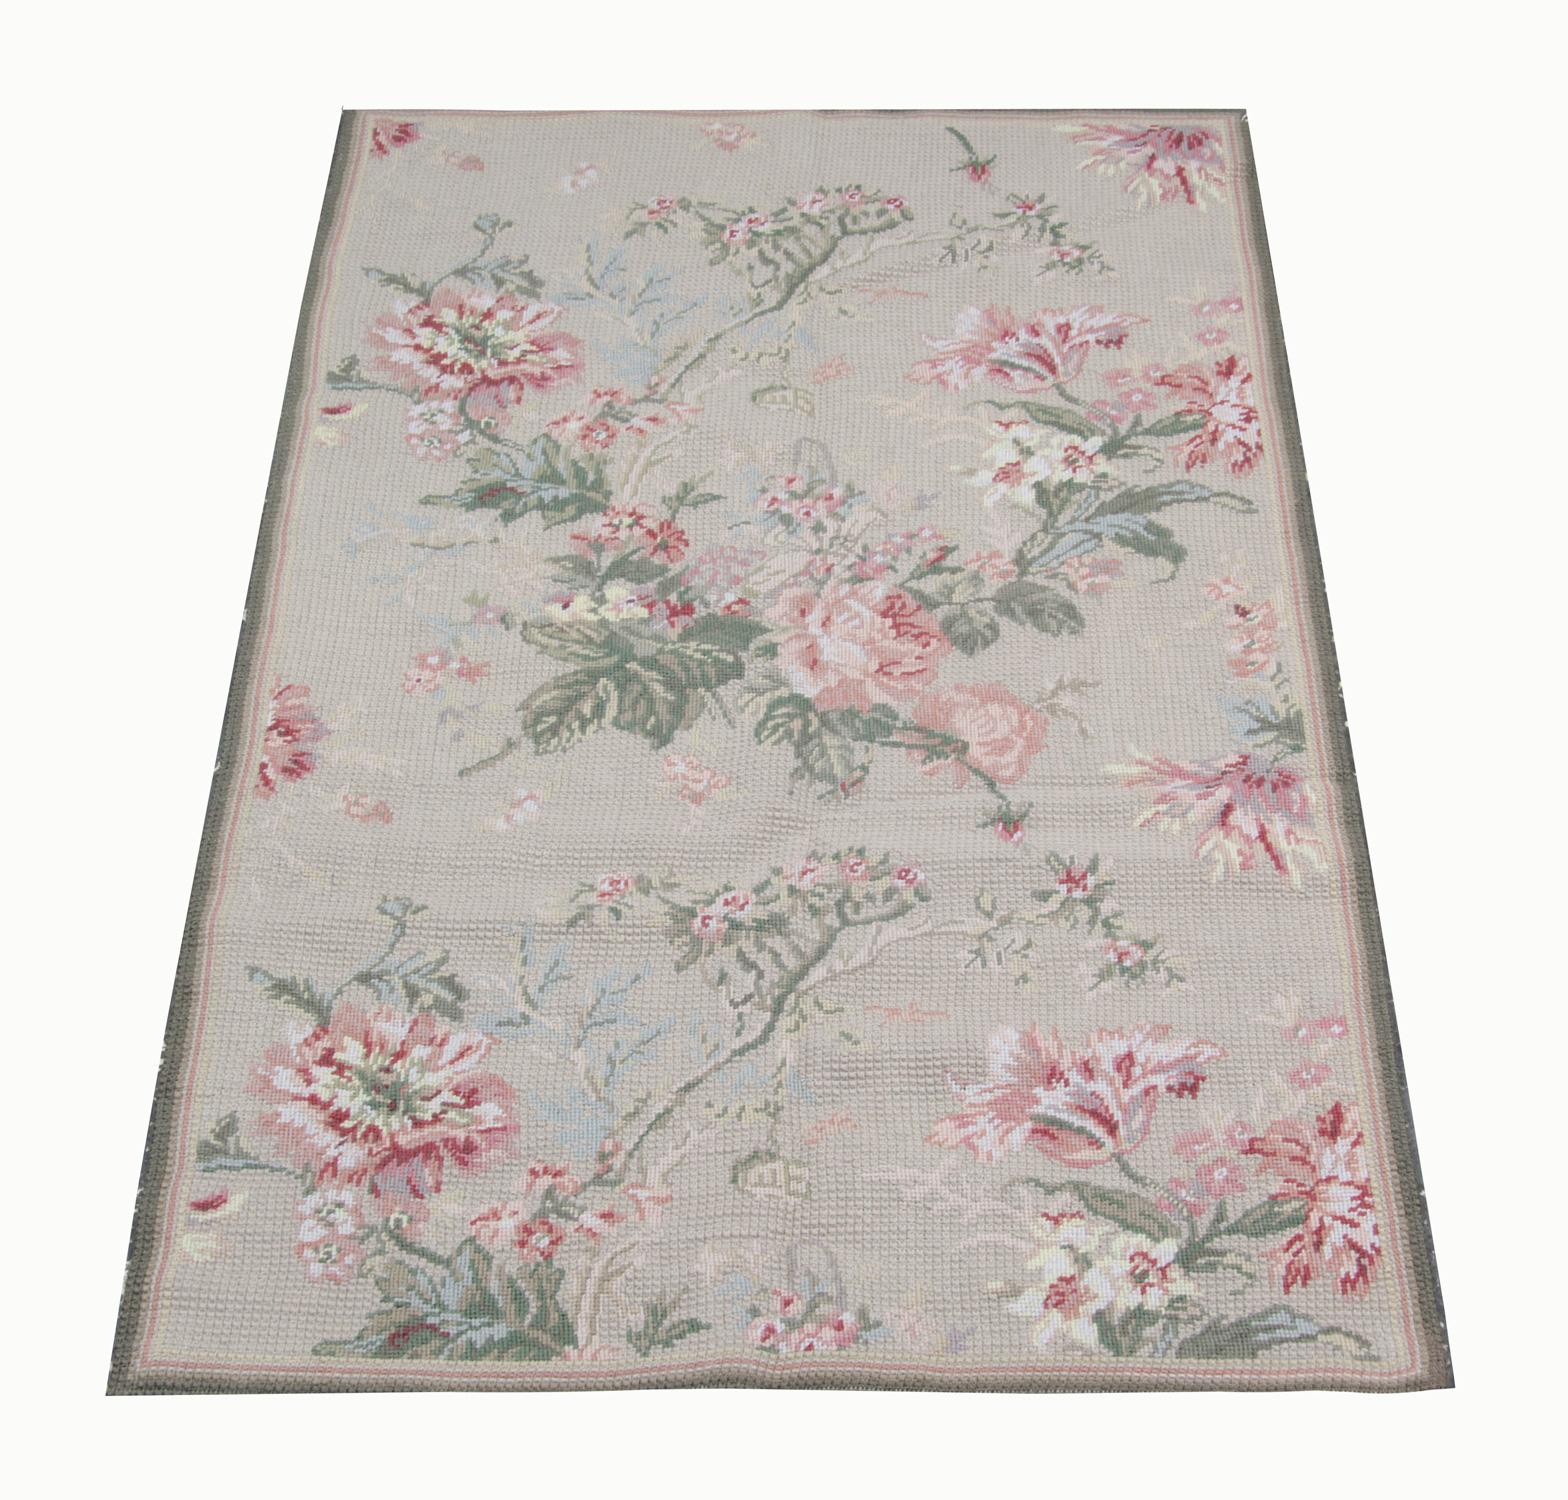 This handmade carpet oriental rug beige cream rug is the very good item as living room rugs and getting most of the attention in rug store by clients because of the colour and design. These handmade elegant Chinese Aubusson floor rugs have The soft